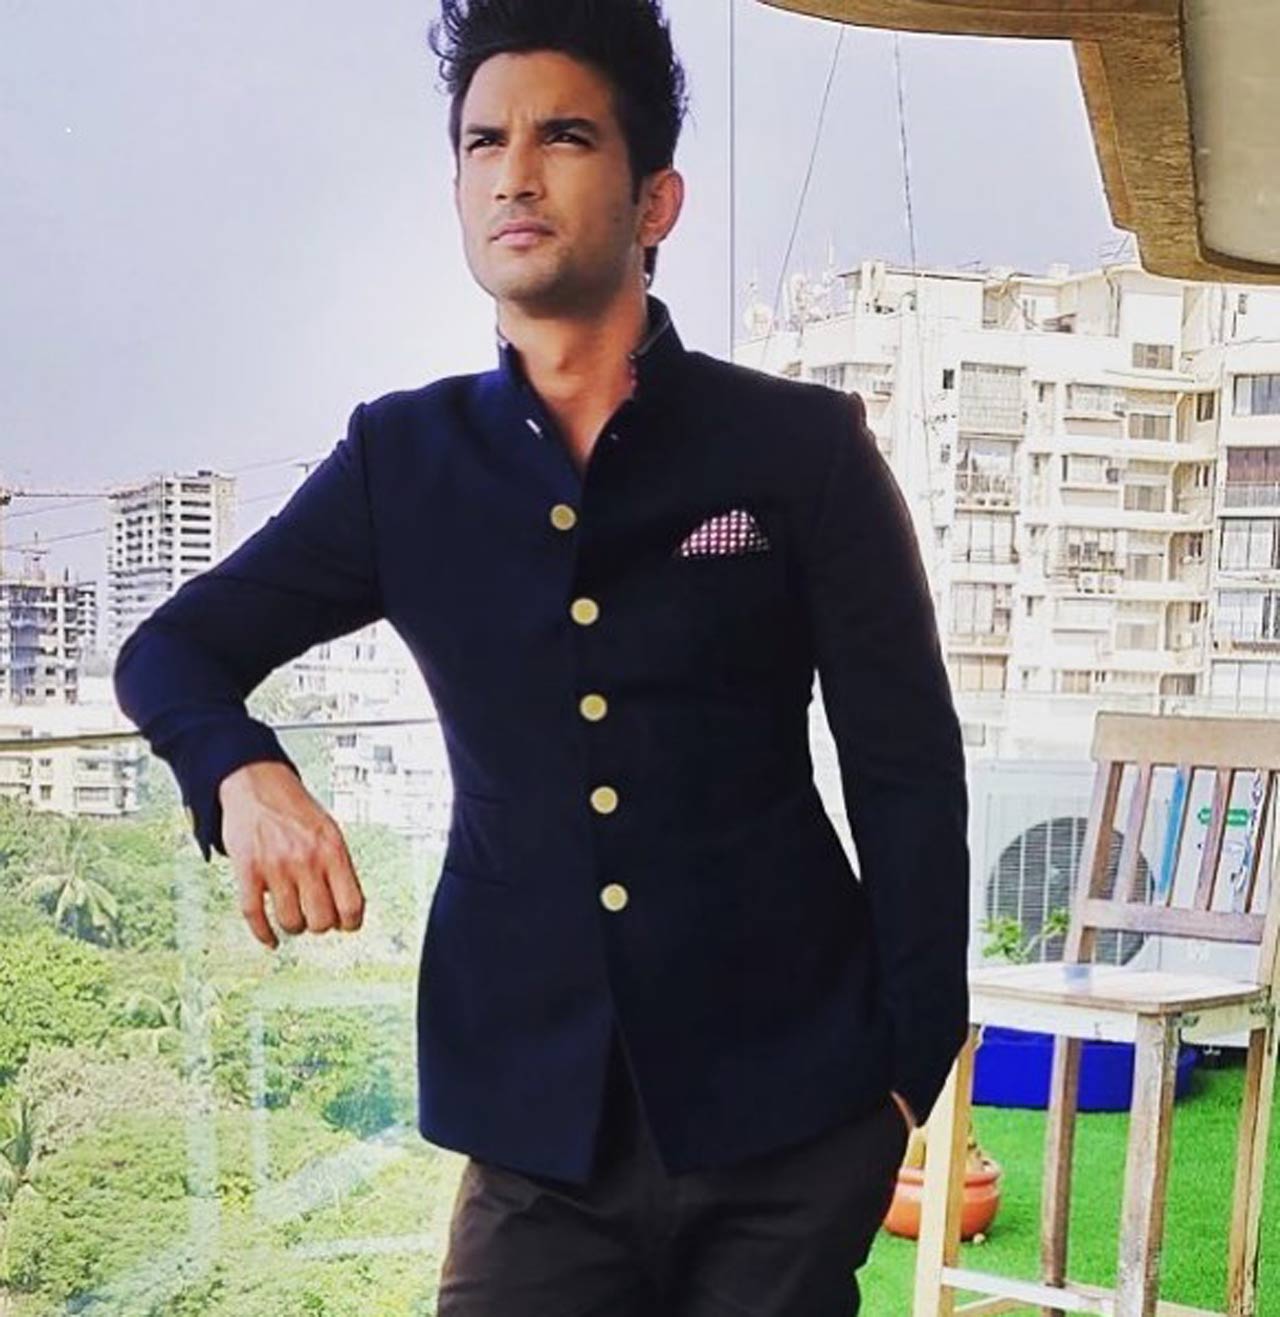 Though not amongst us anymore, Sushant Singh Rajput still shines like a star in the industry with his remarkable performances. The actor who stole everyone’s hearts with his outstanding performances with every role he played, started his career with the TV show Kis Desh Mai Hai Mera Dil and Pavitra Rishta